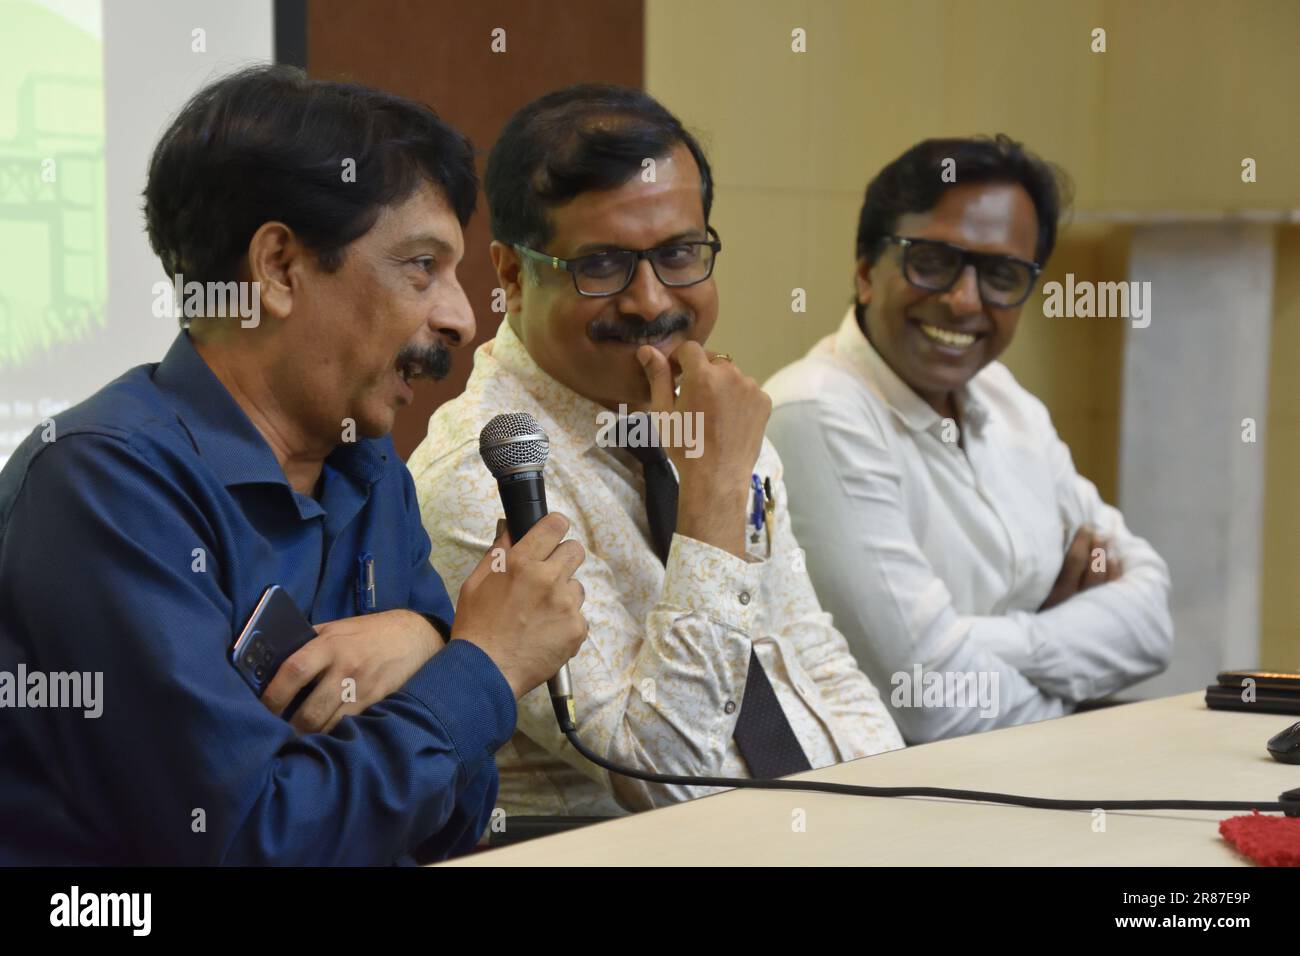 Kolkata, India. 19th June, 2023. Pramod Grover, Director-In-Charge, Science City, talking at a press meet for upcoming event, celebration of the International Day of Yoga with about 500 underprivileged children and school children in the Science City premises on June 21, 2023. The event will be a one-of-a-kind initiative at the heart of the city as several dignitaries and sports personalities. It will be organised jointly by Science City, Kolkata and The Kidney Care Society. (Photo by Biswarup Ganguly/Pacific Press) Credit: Pacific Press Media Production Corp./Alamy Live News Stock Photo